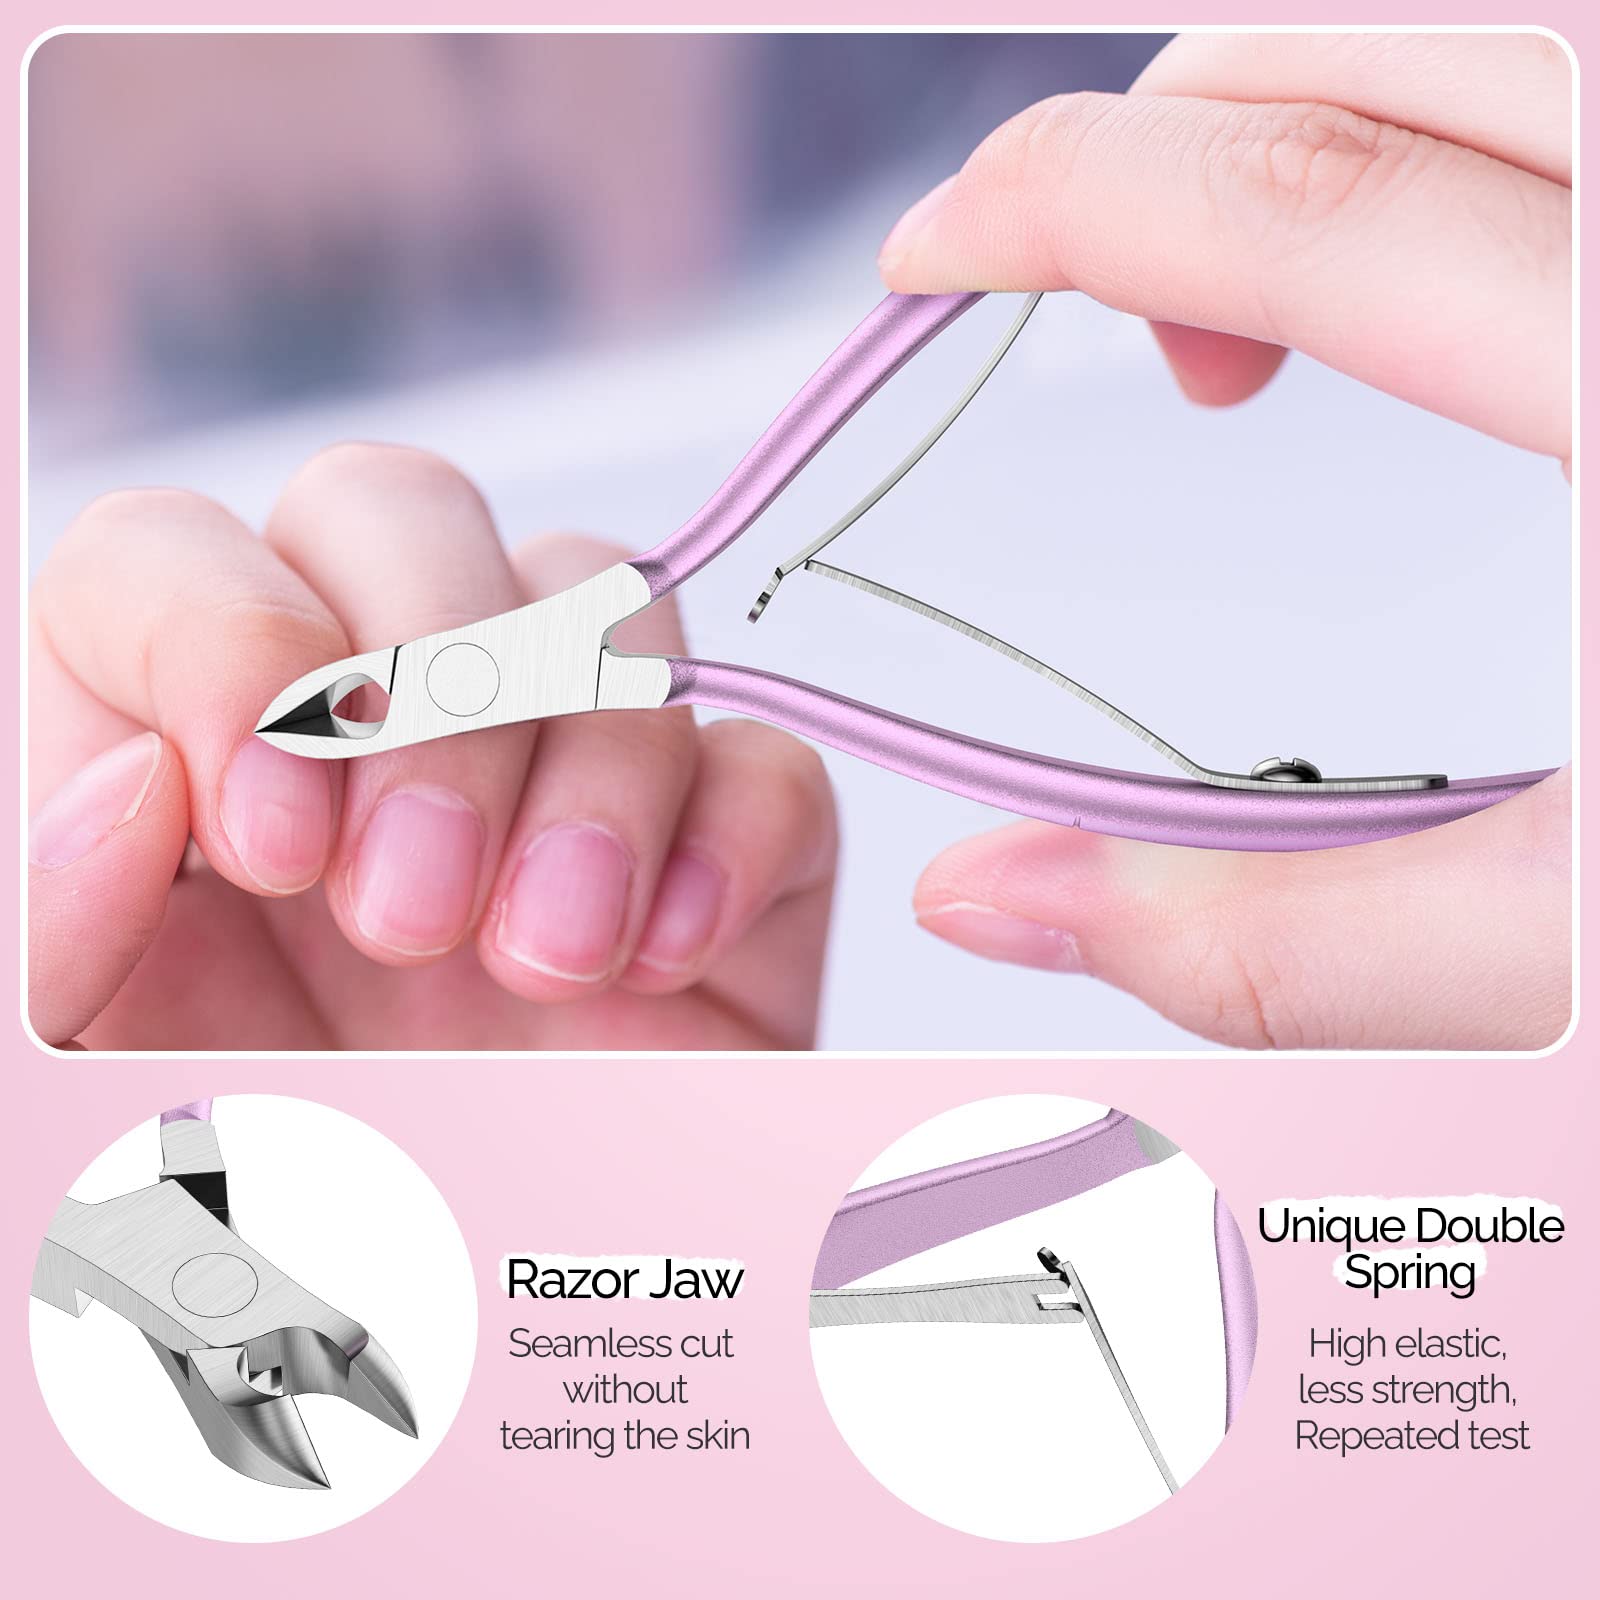 Acrylic Nail Clipper 4 in 1 Kit Pink